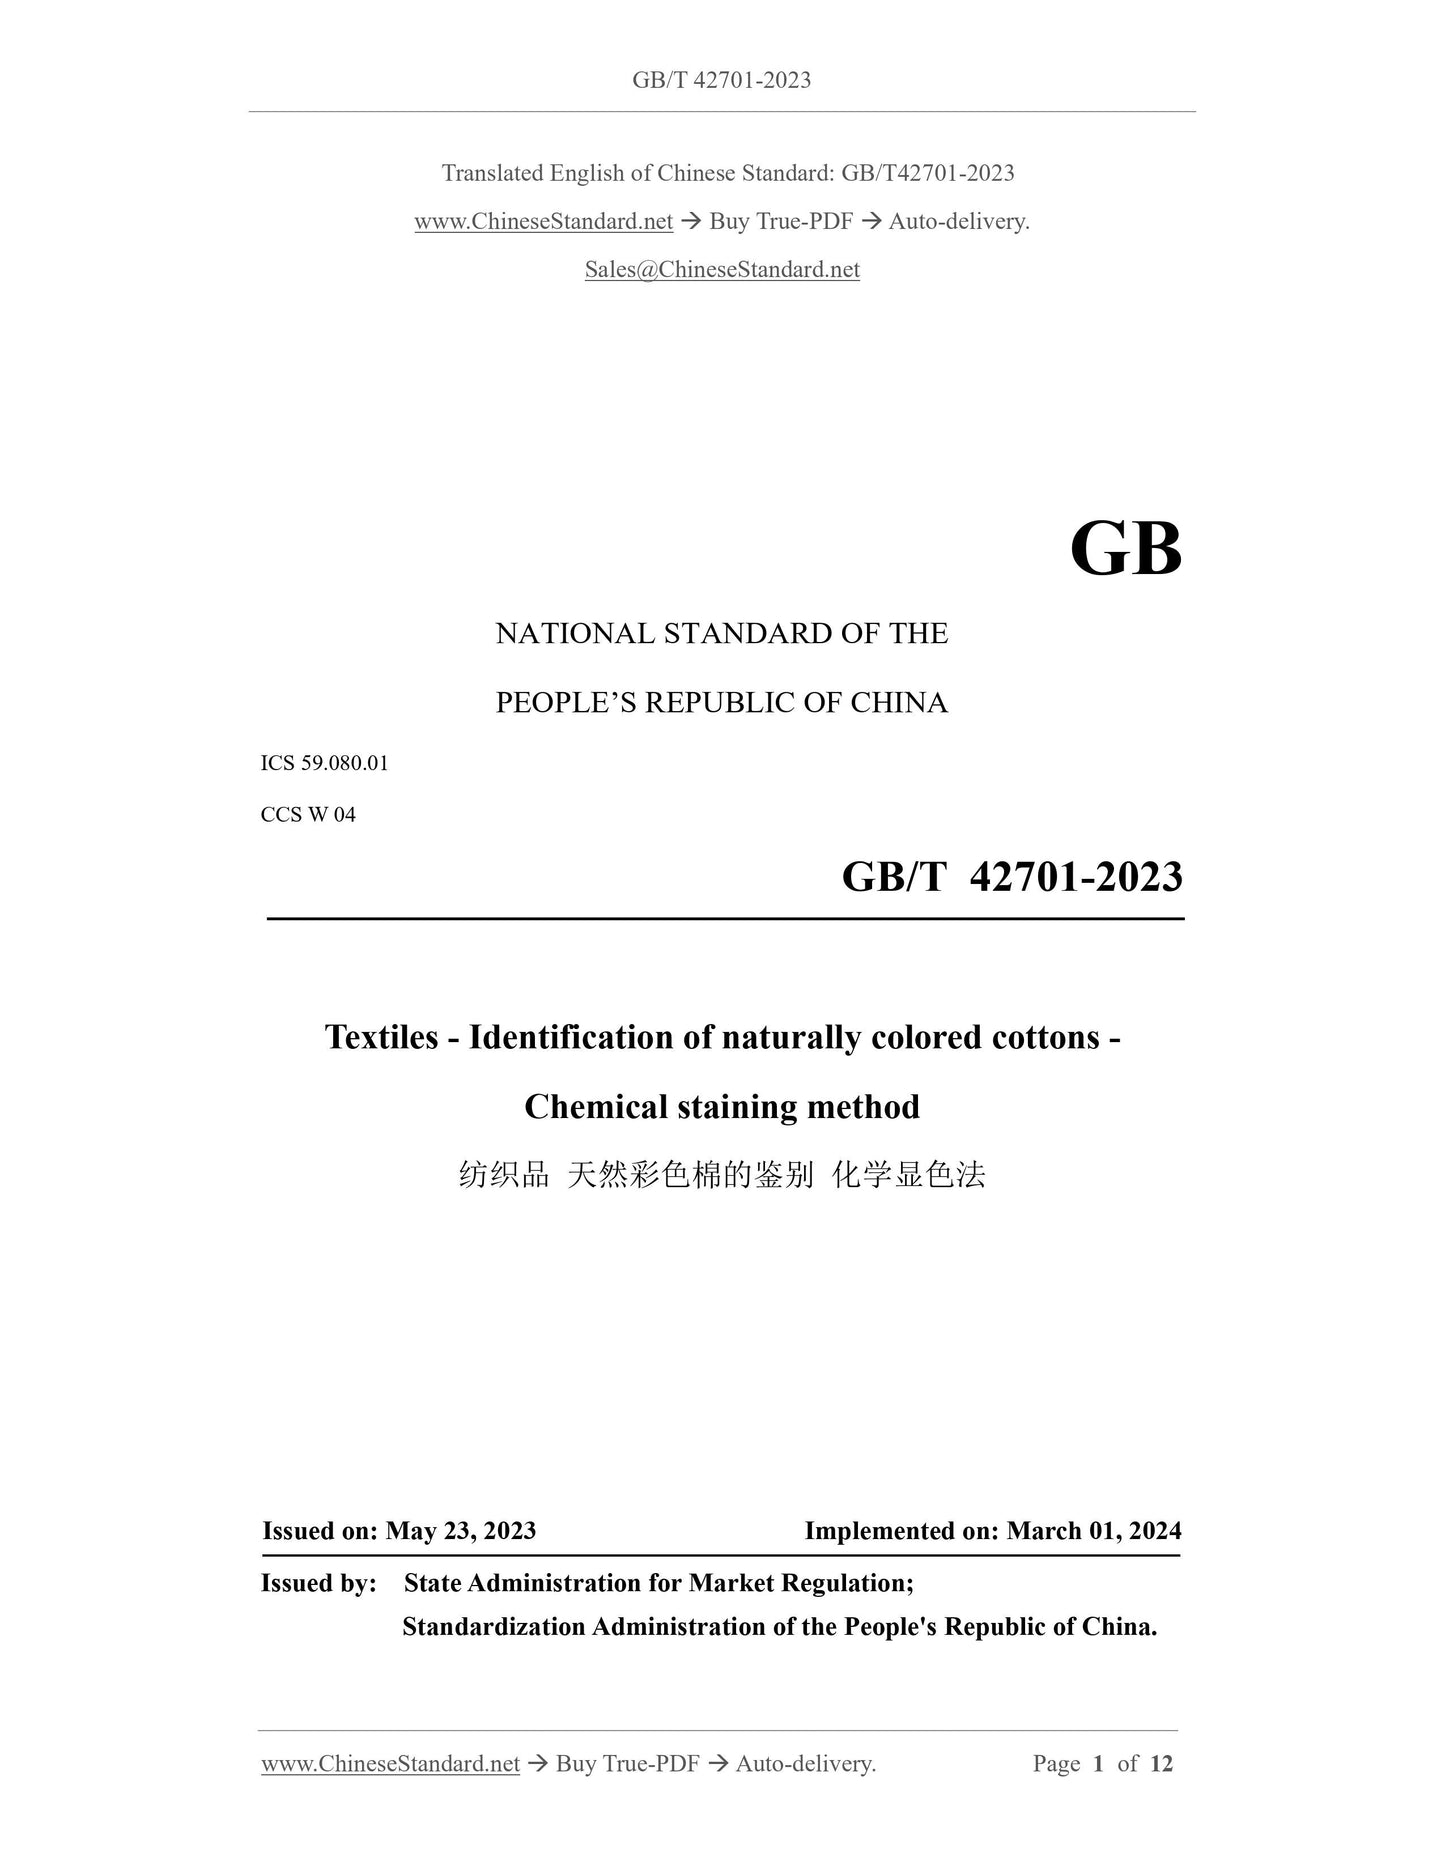 GB/T 42701-2023 Page 1